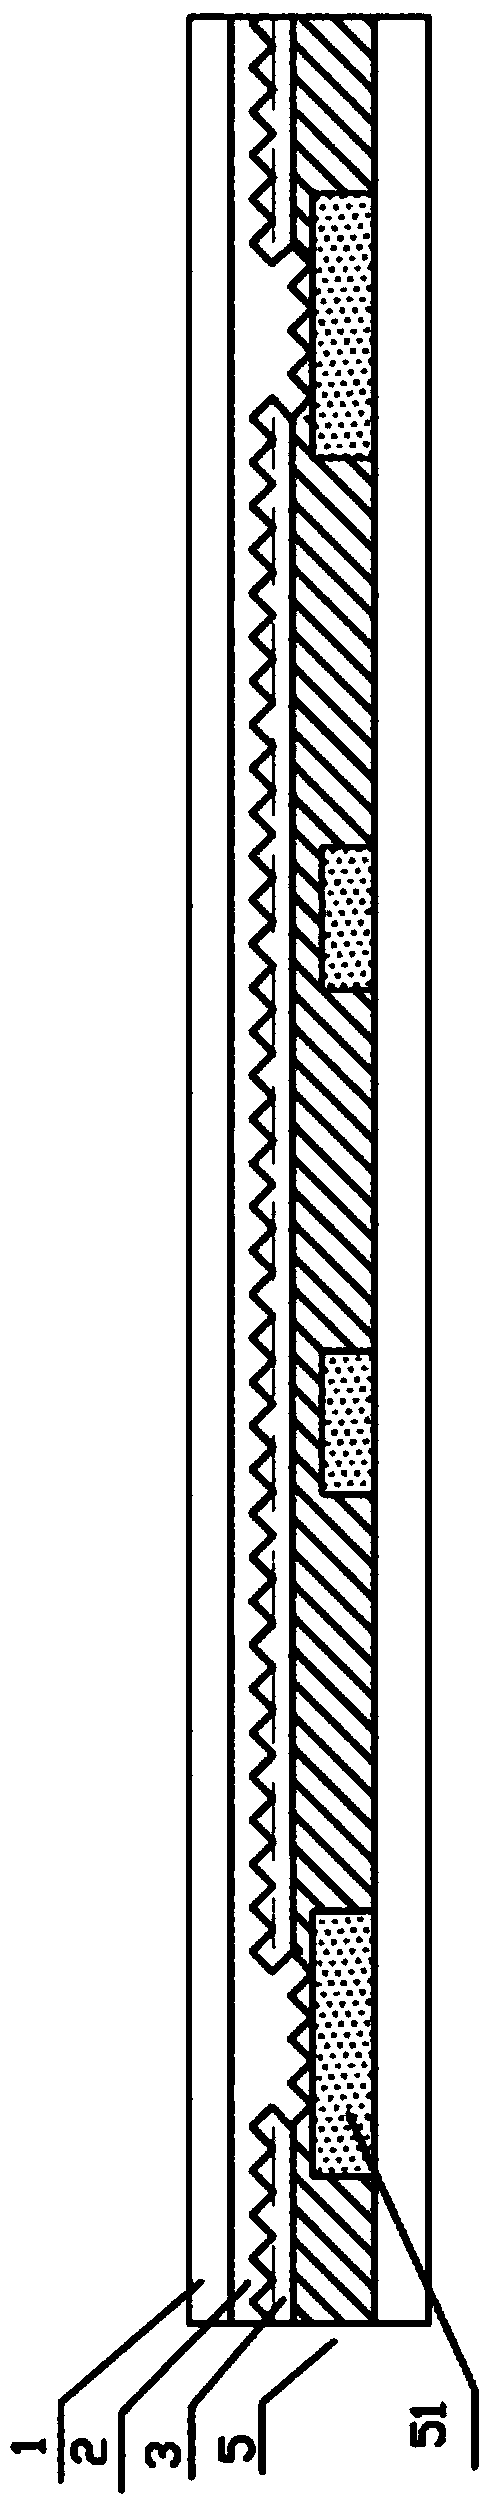 Ultrahigh-frequency electromagnetic wave shielding film without chemical electroplating process and conductive particles, and manufacturing method of circuit board comprising film